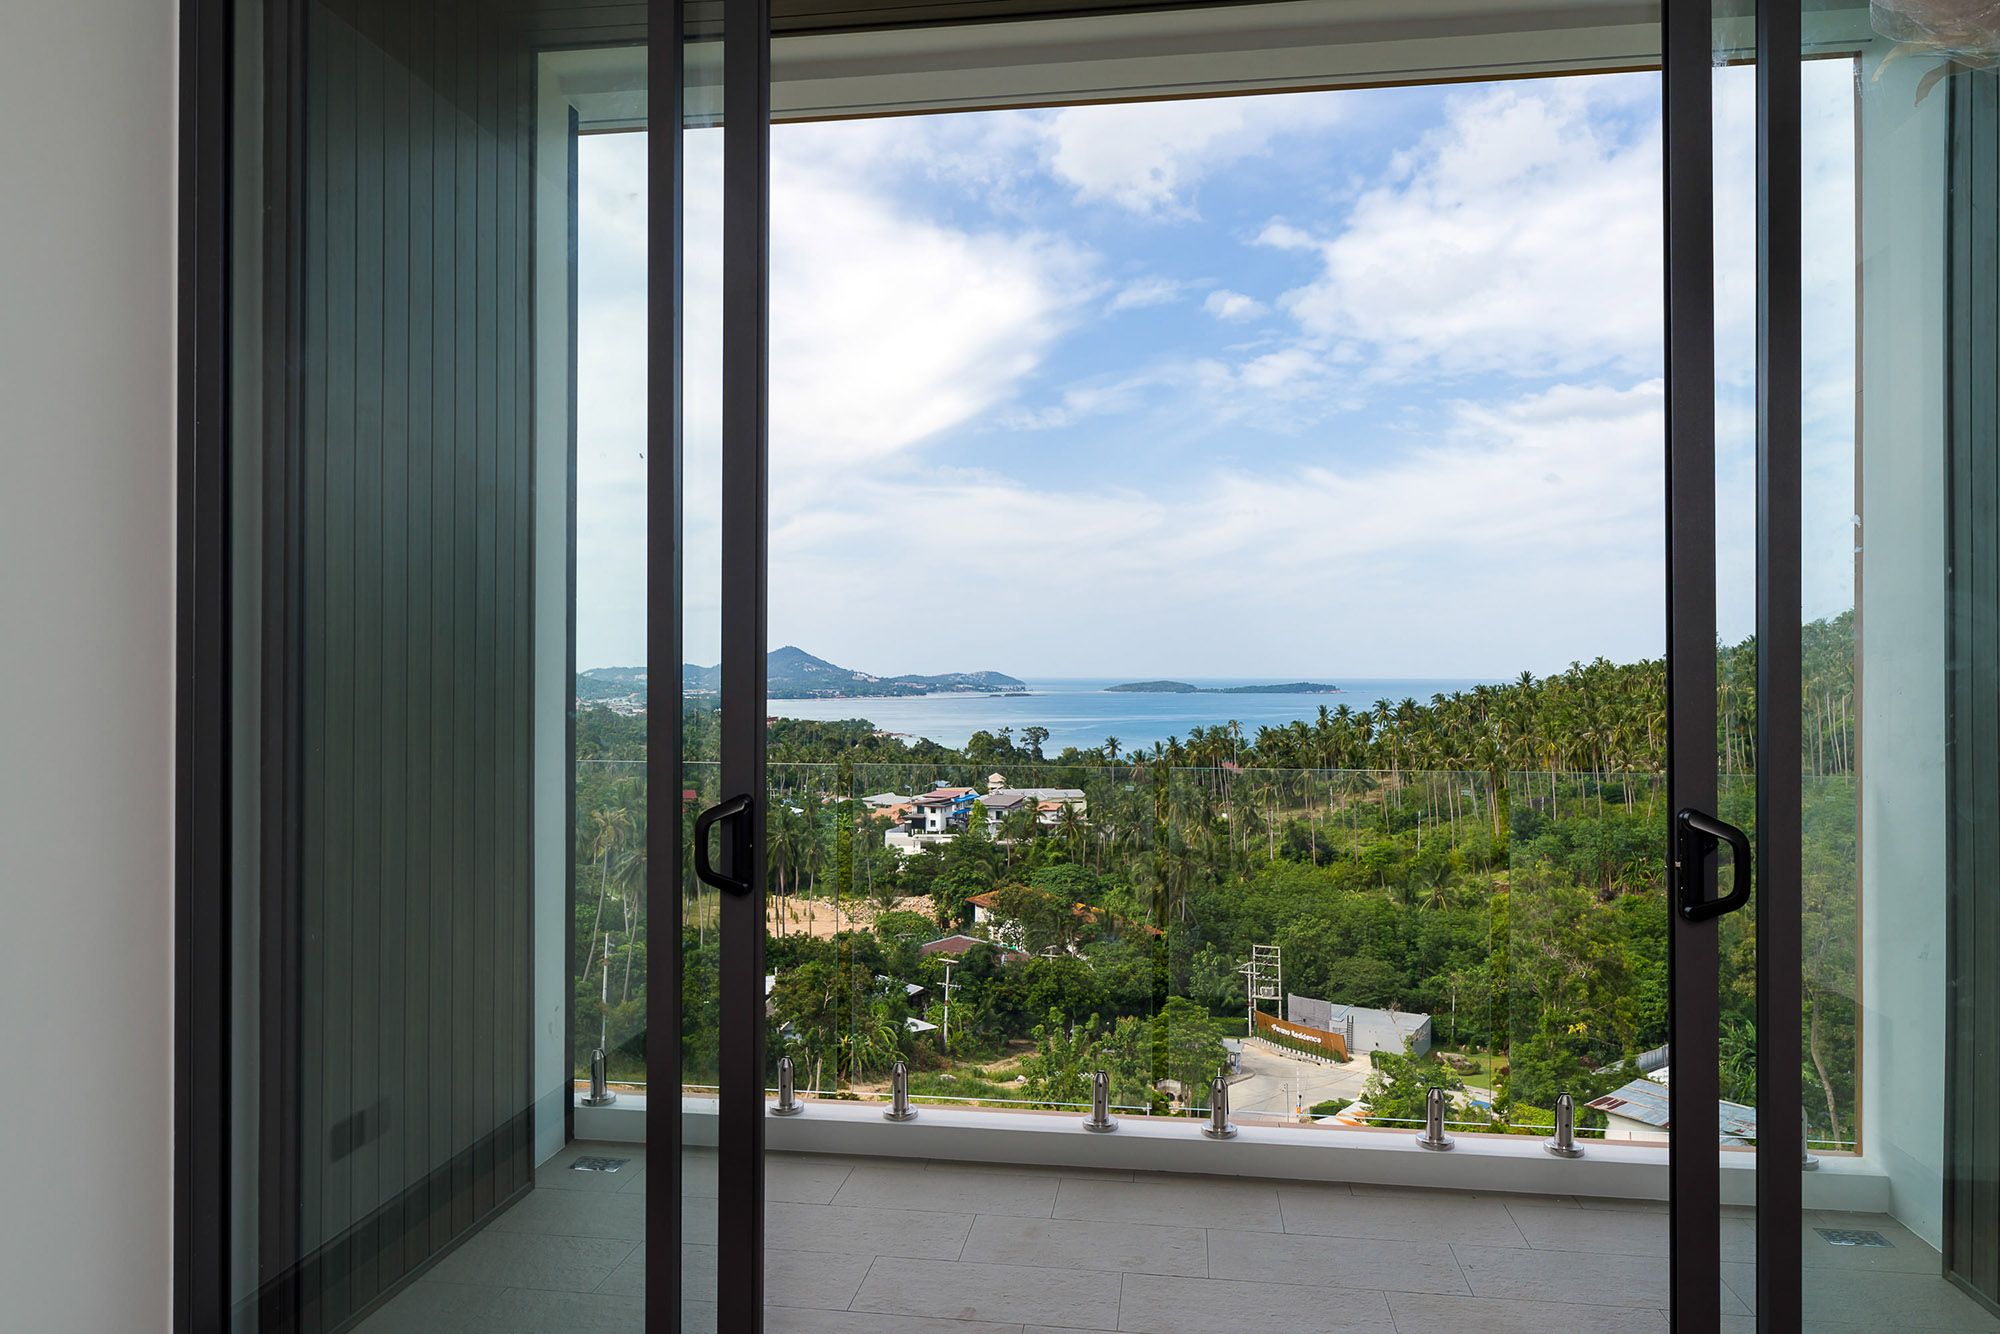  3 bedroom sea view villa located at Chaweng Noi: 3 bedroom sea view villa located at Chaweng Noi